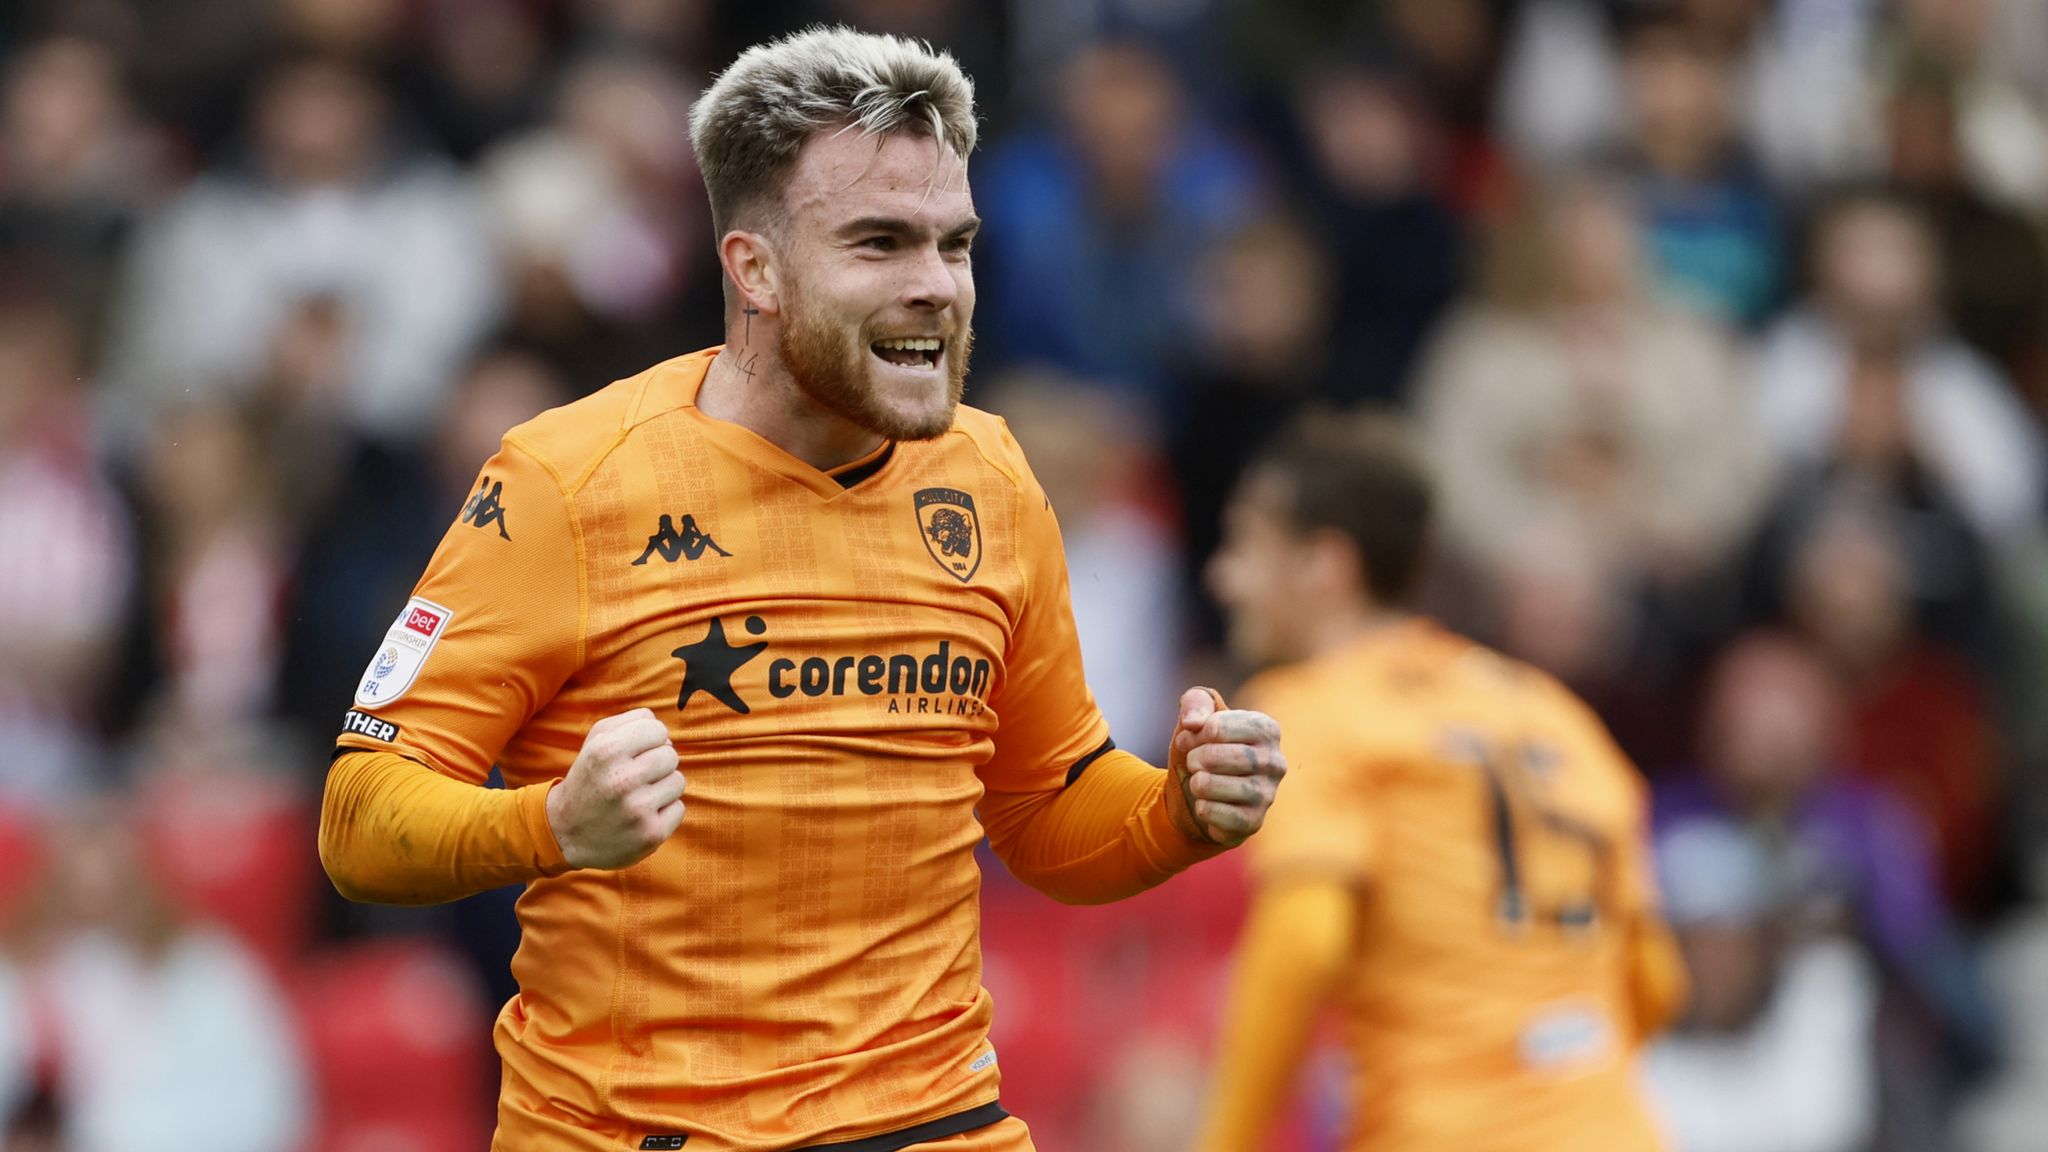 Stoke City 1-3 Hull City Aaron Connolly scores fifth goal of season in comfortable Tigers win Football News Sky Sports